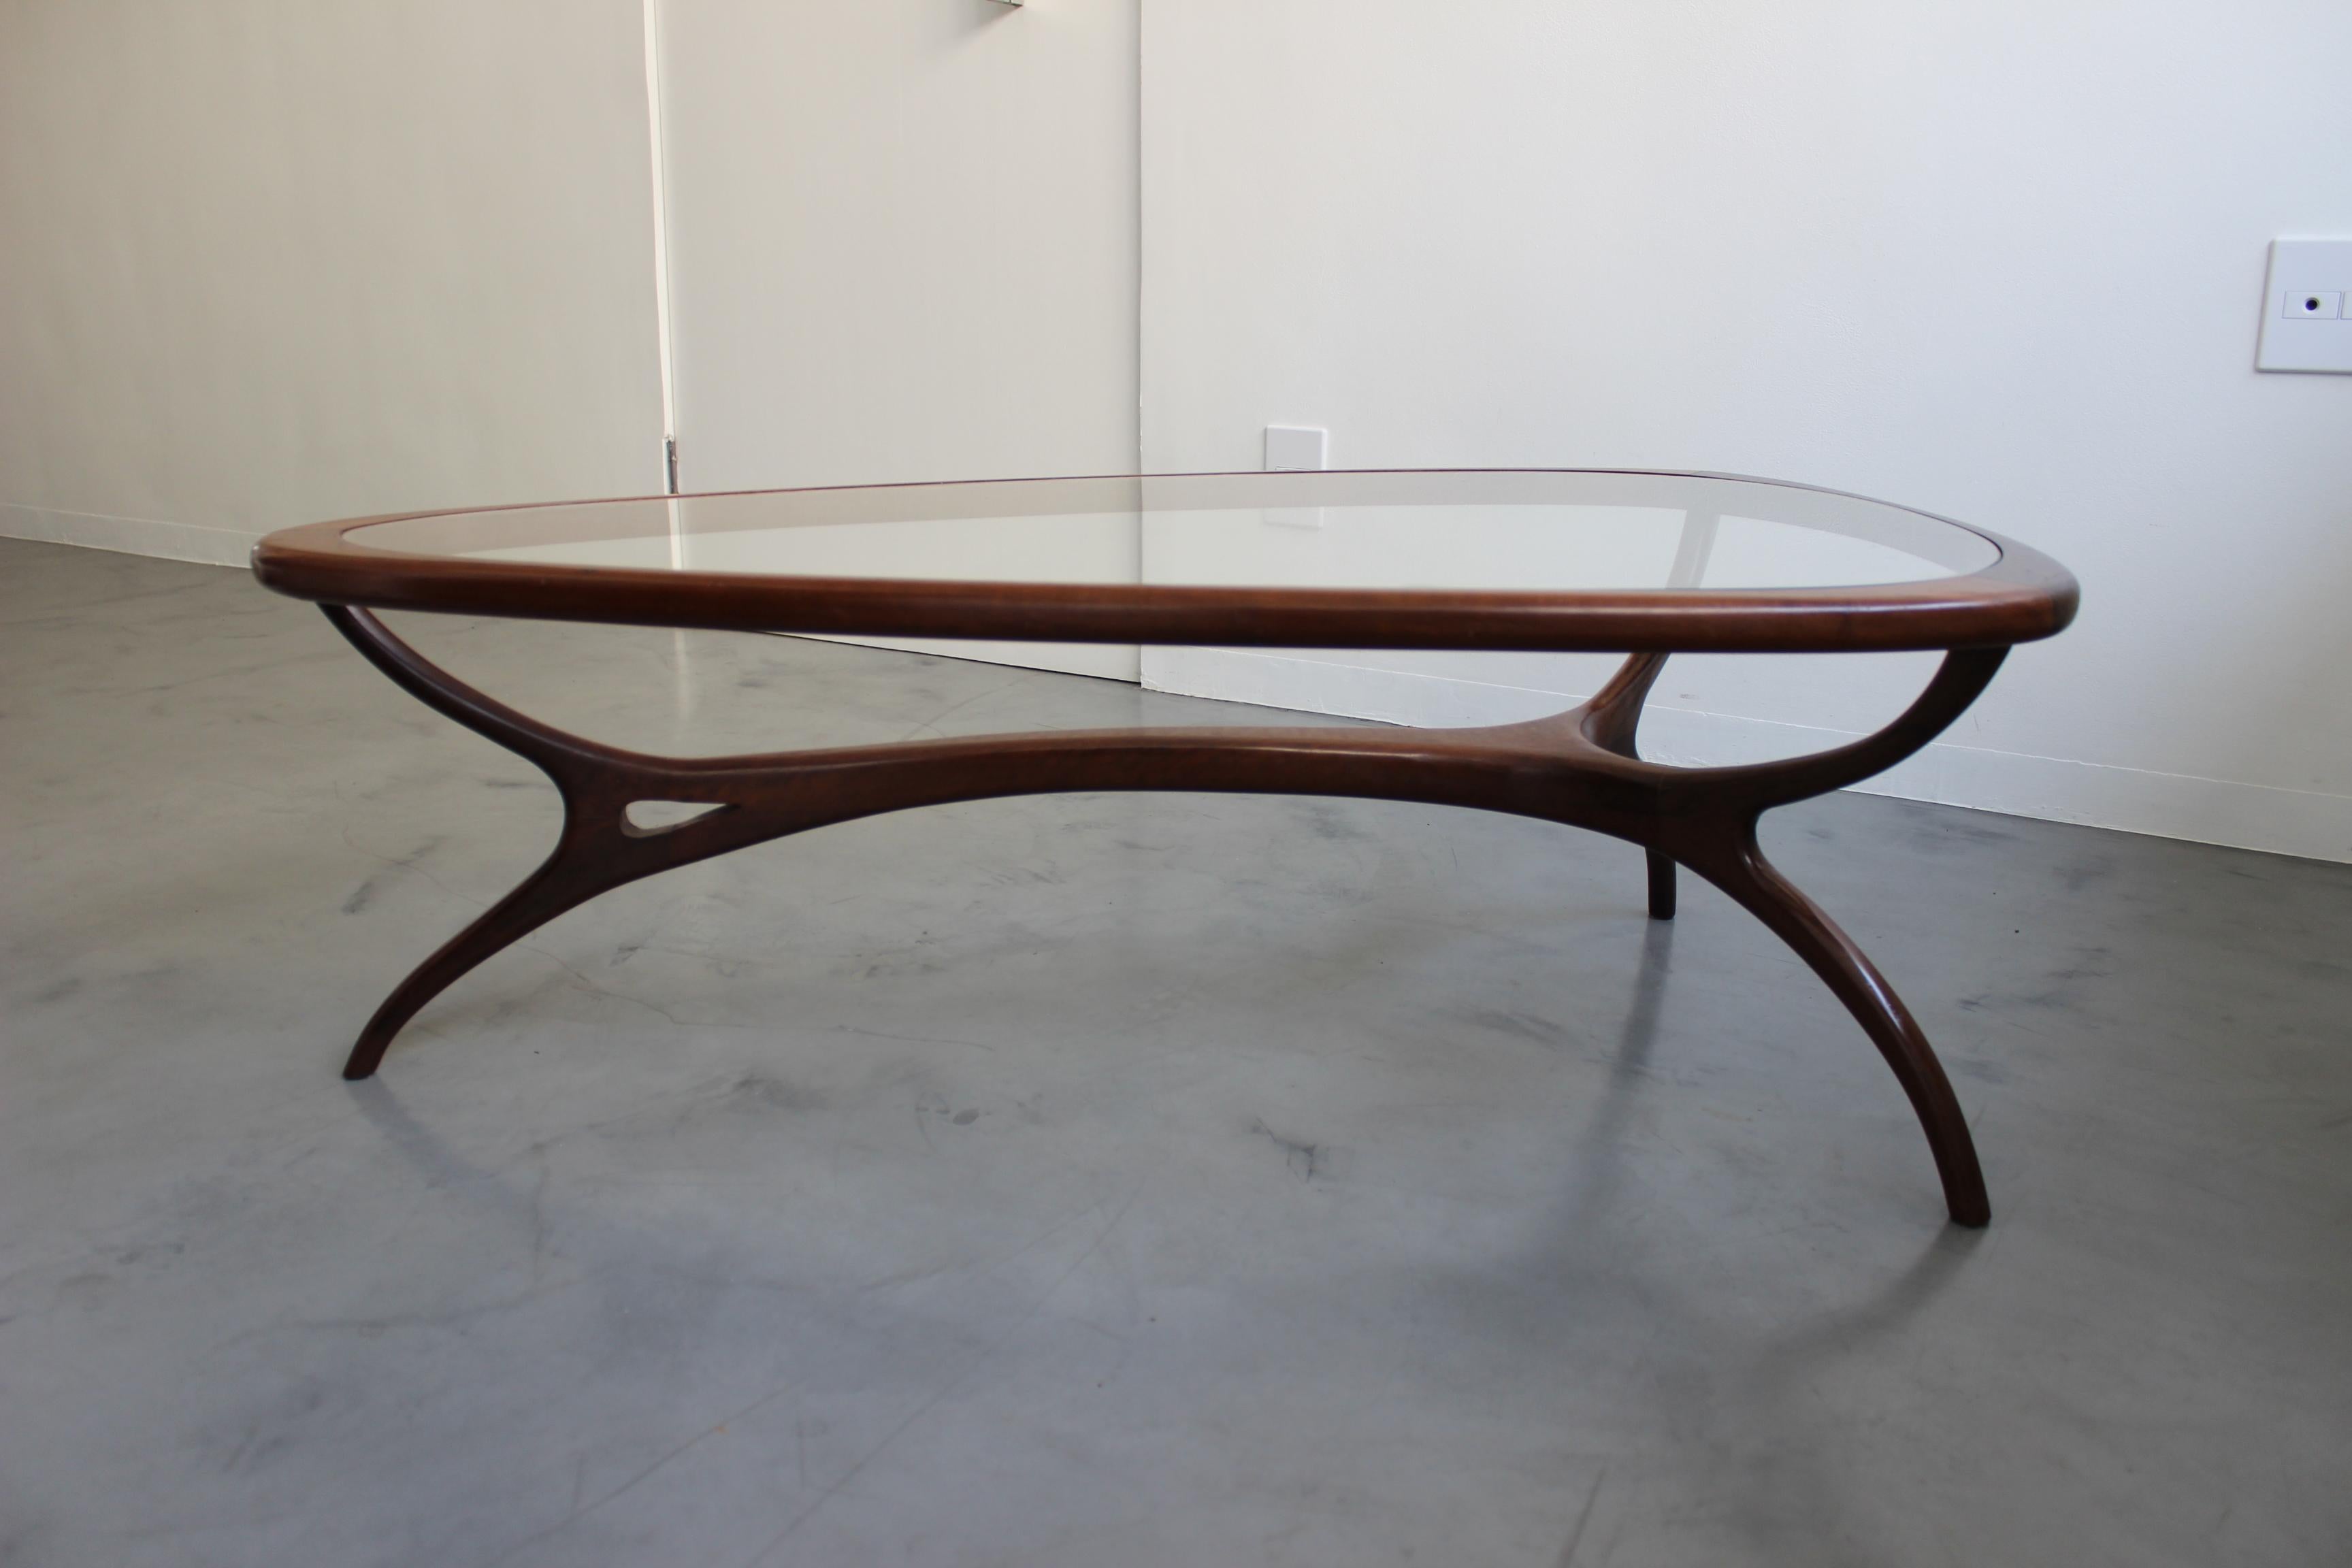 Beautiful sensual wooden curves and glass produce a sculptural coffee table by Italian-Brazilian Modern master Giuseppe Scapinelli